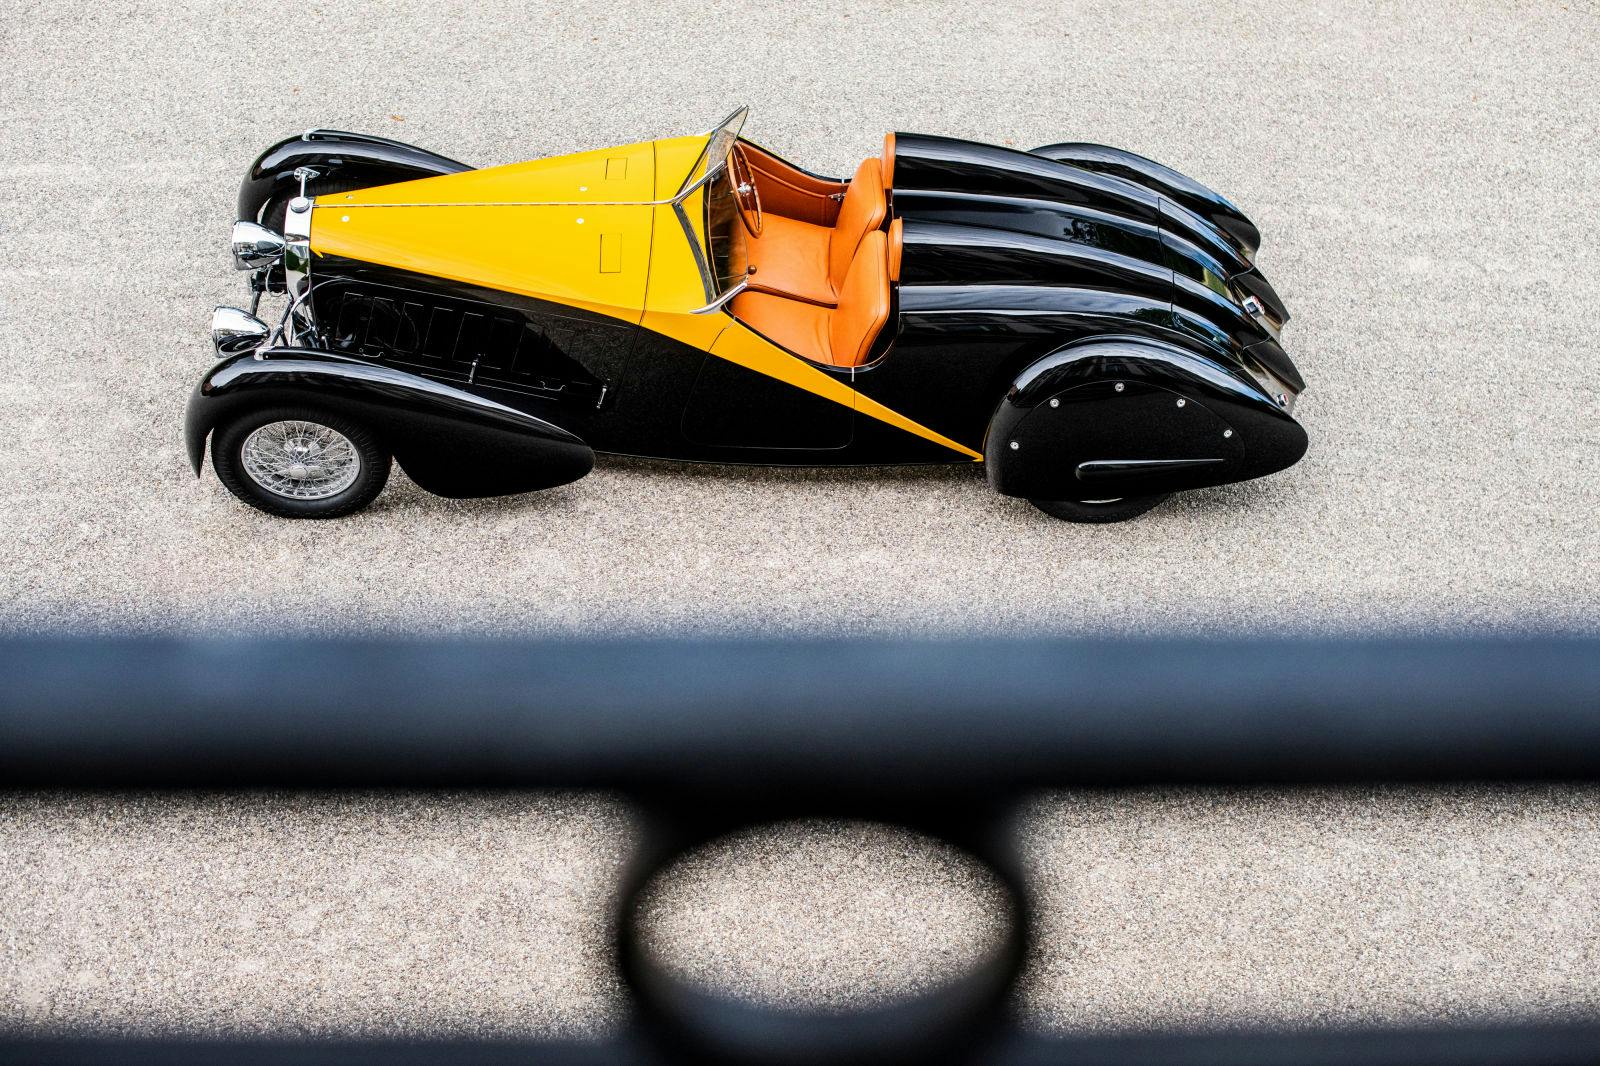 The Type 57 Roadster Grand Raid Usine is finished in black and yellow –the favorite colors of Ettore Bugatti.